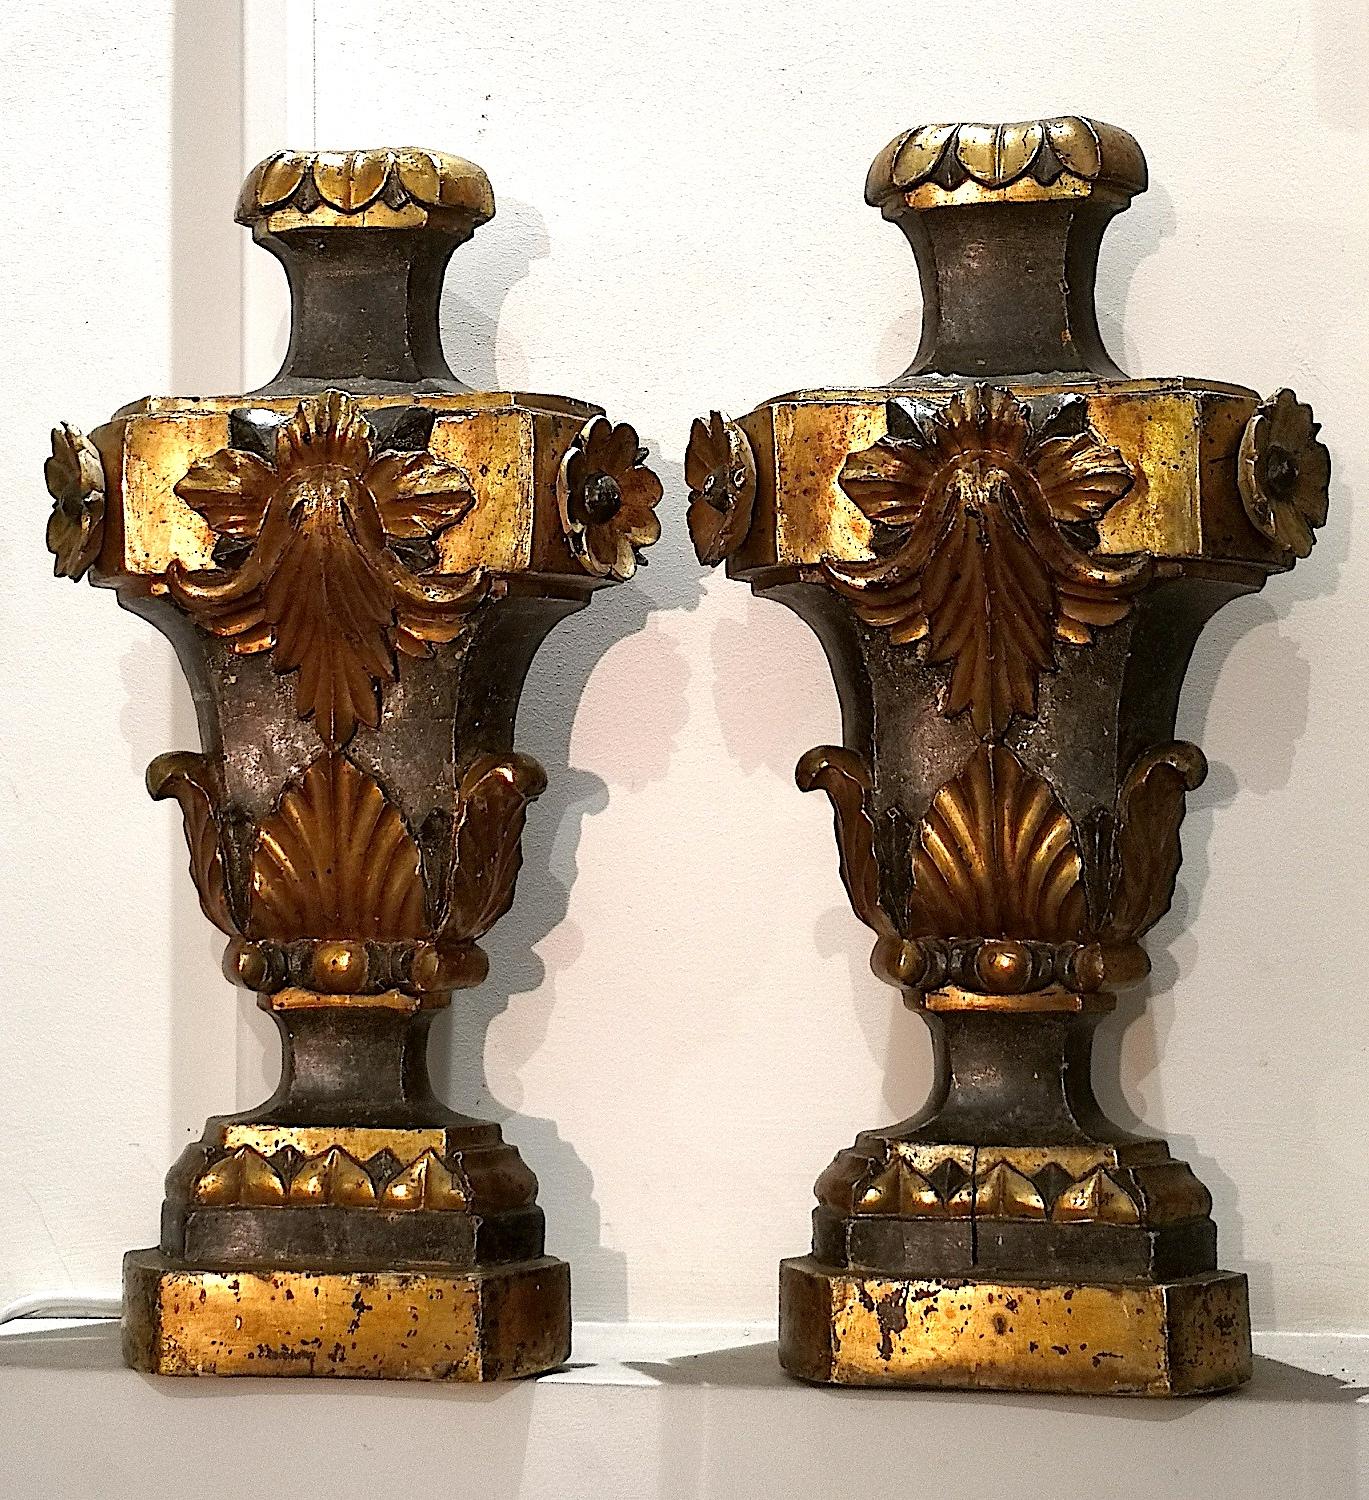 A wonderful pair of large carved Sicilian painted and guilt church altar ornaments from 1643-1715 in the Louis XIV style. Each measures: 21.25 inches high. The base is 7.5 inches wide and 7.8 inches deep. The use of these objects took place in the